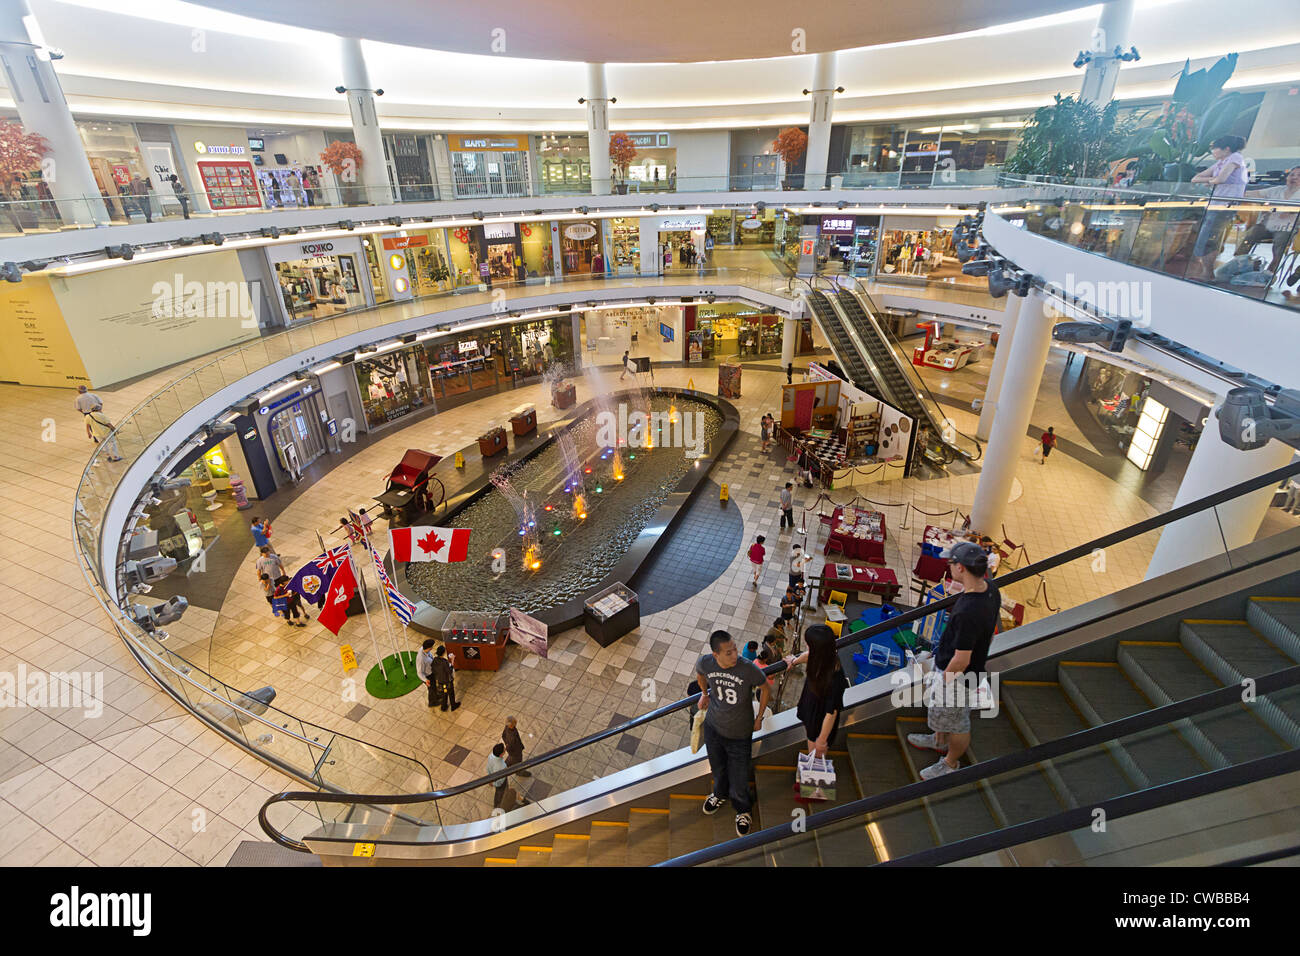 Central atrium in Aberdeen Centre, a shopping mall in Richmond, BC, Canada with a strong Asian focus. Stock Photo